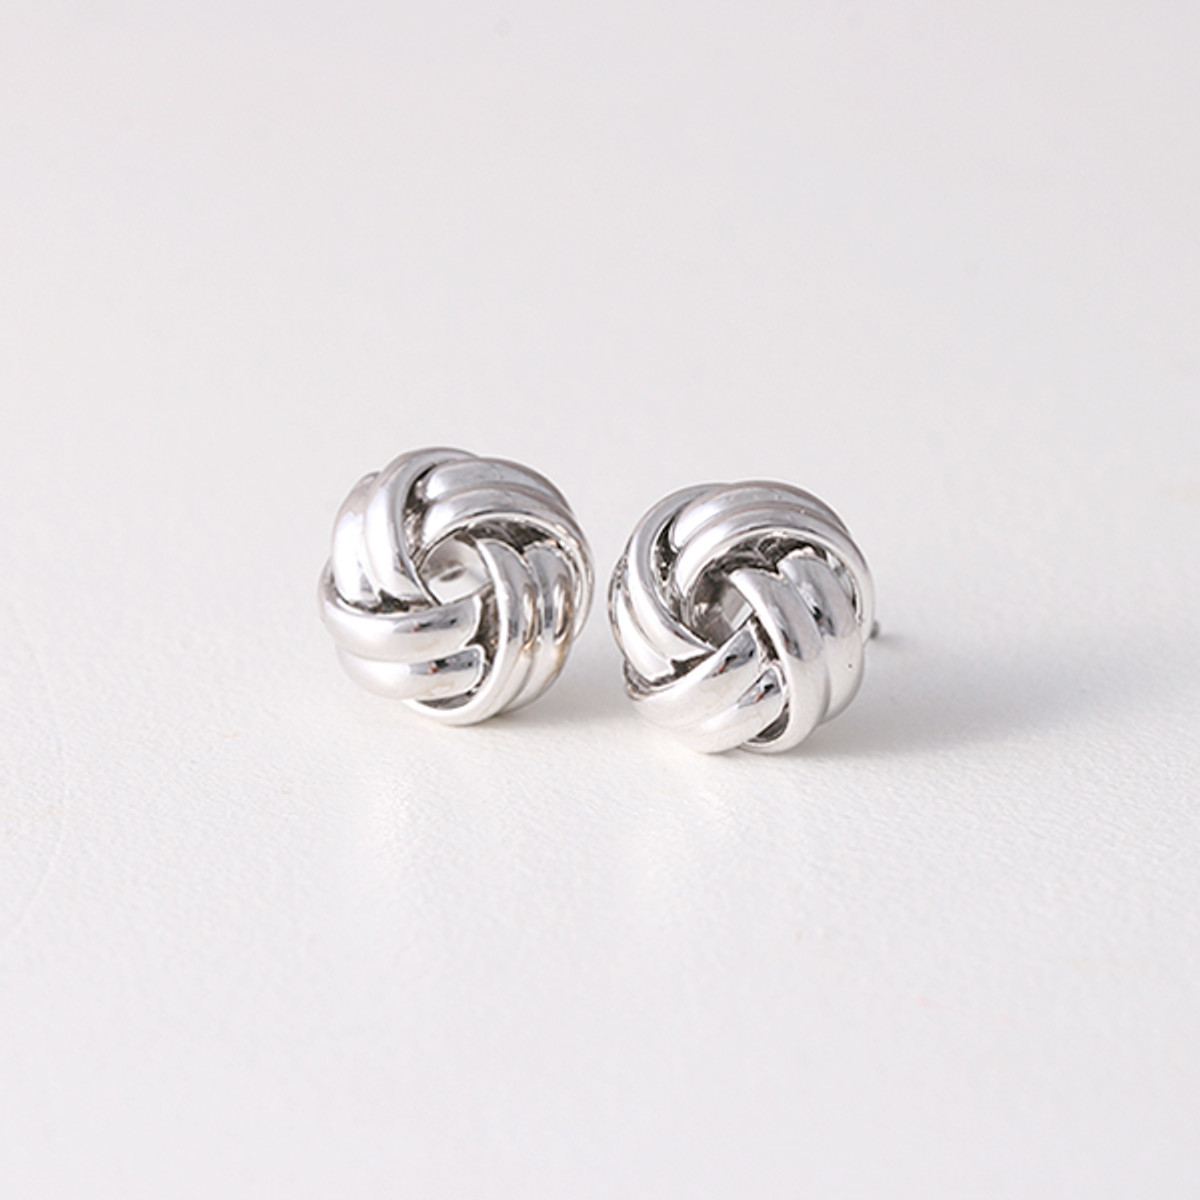 Classic White Gold Love Knot Earrings Studs Silver Post - kellinsilver.com